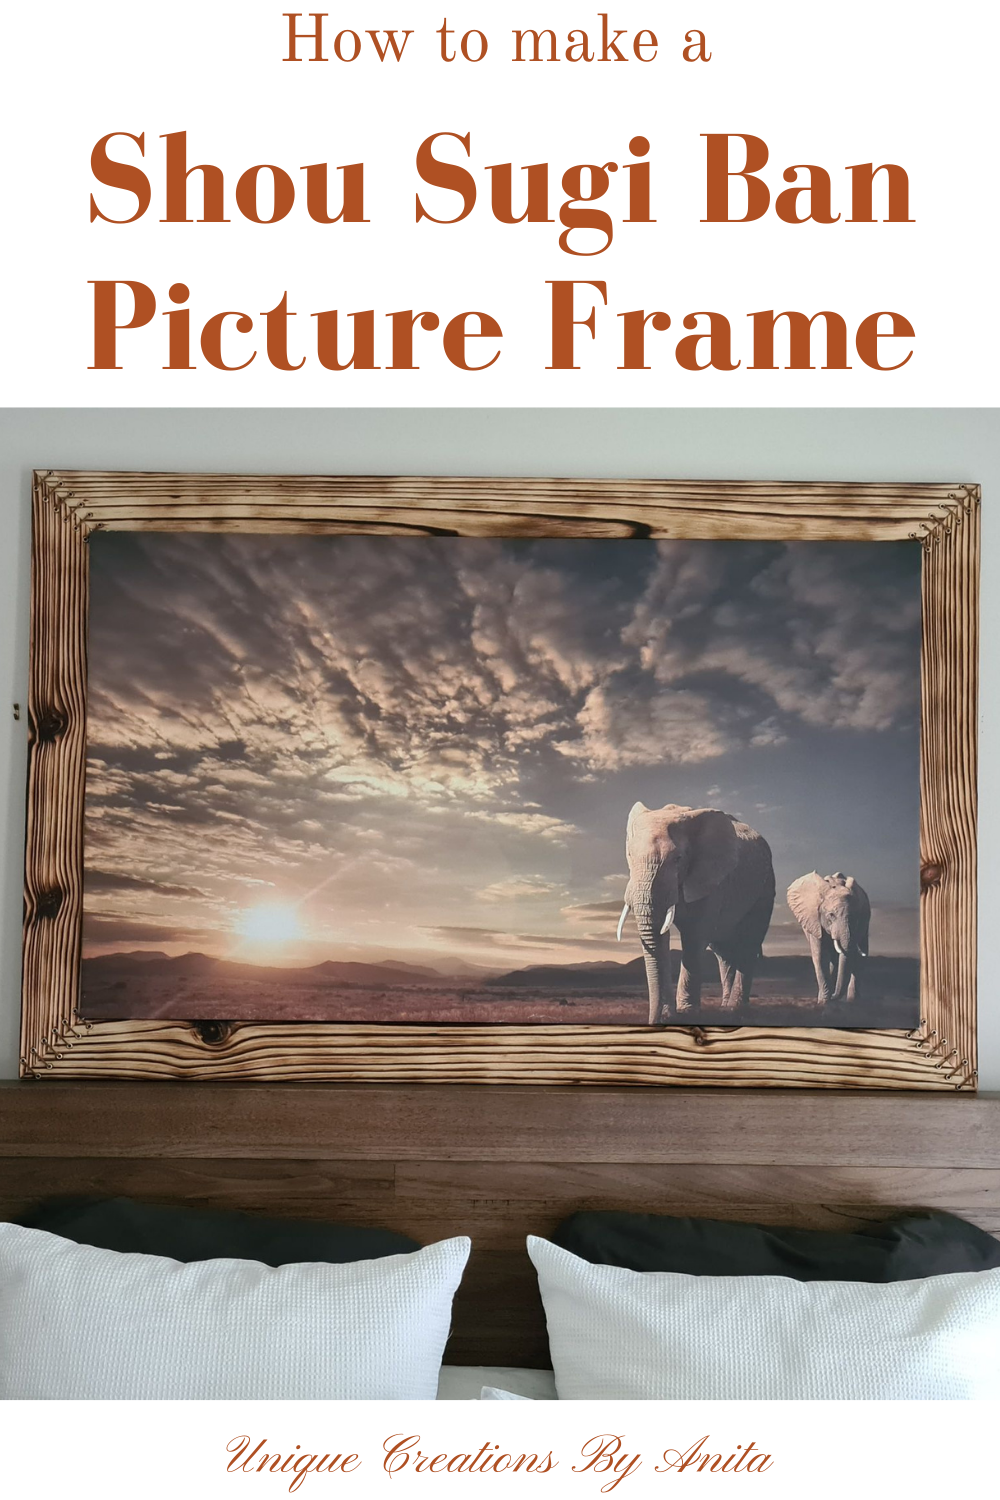 This tutorial will show you how to achieve this stunning effect on your diy picture frames. This wood burning technique will bring your pictures to life in a unique way